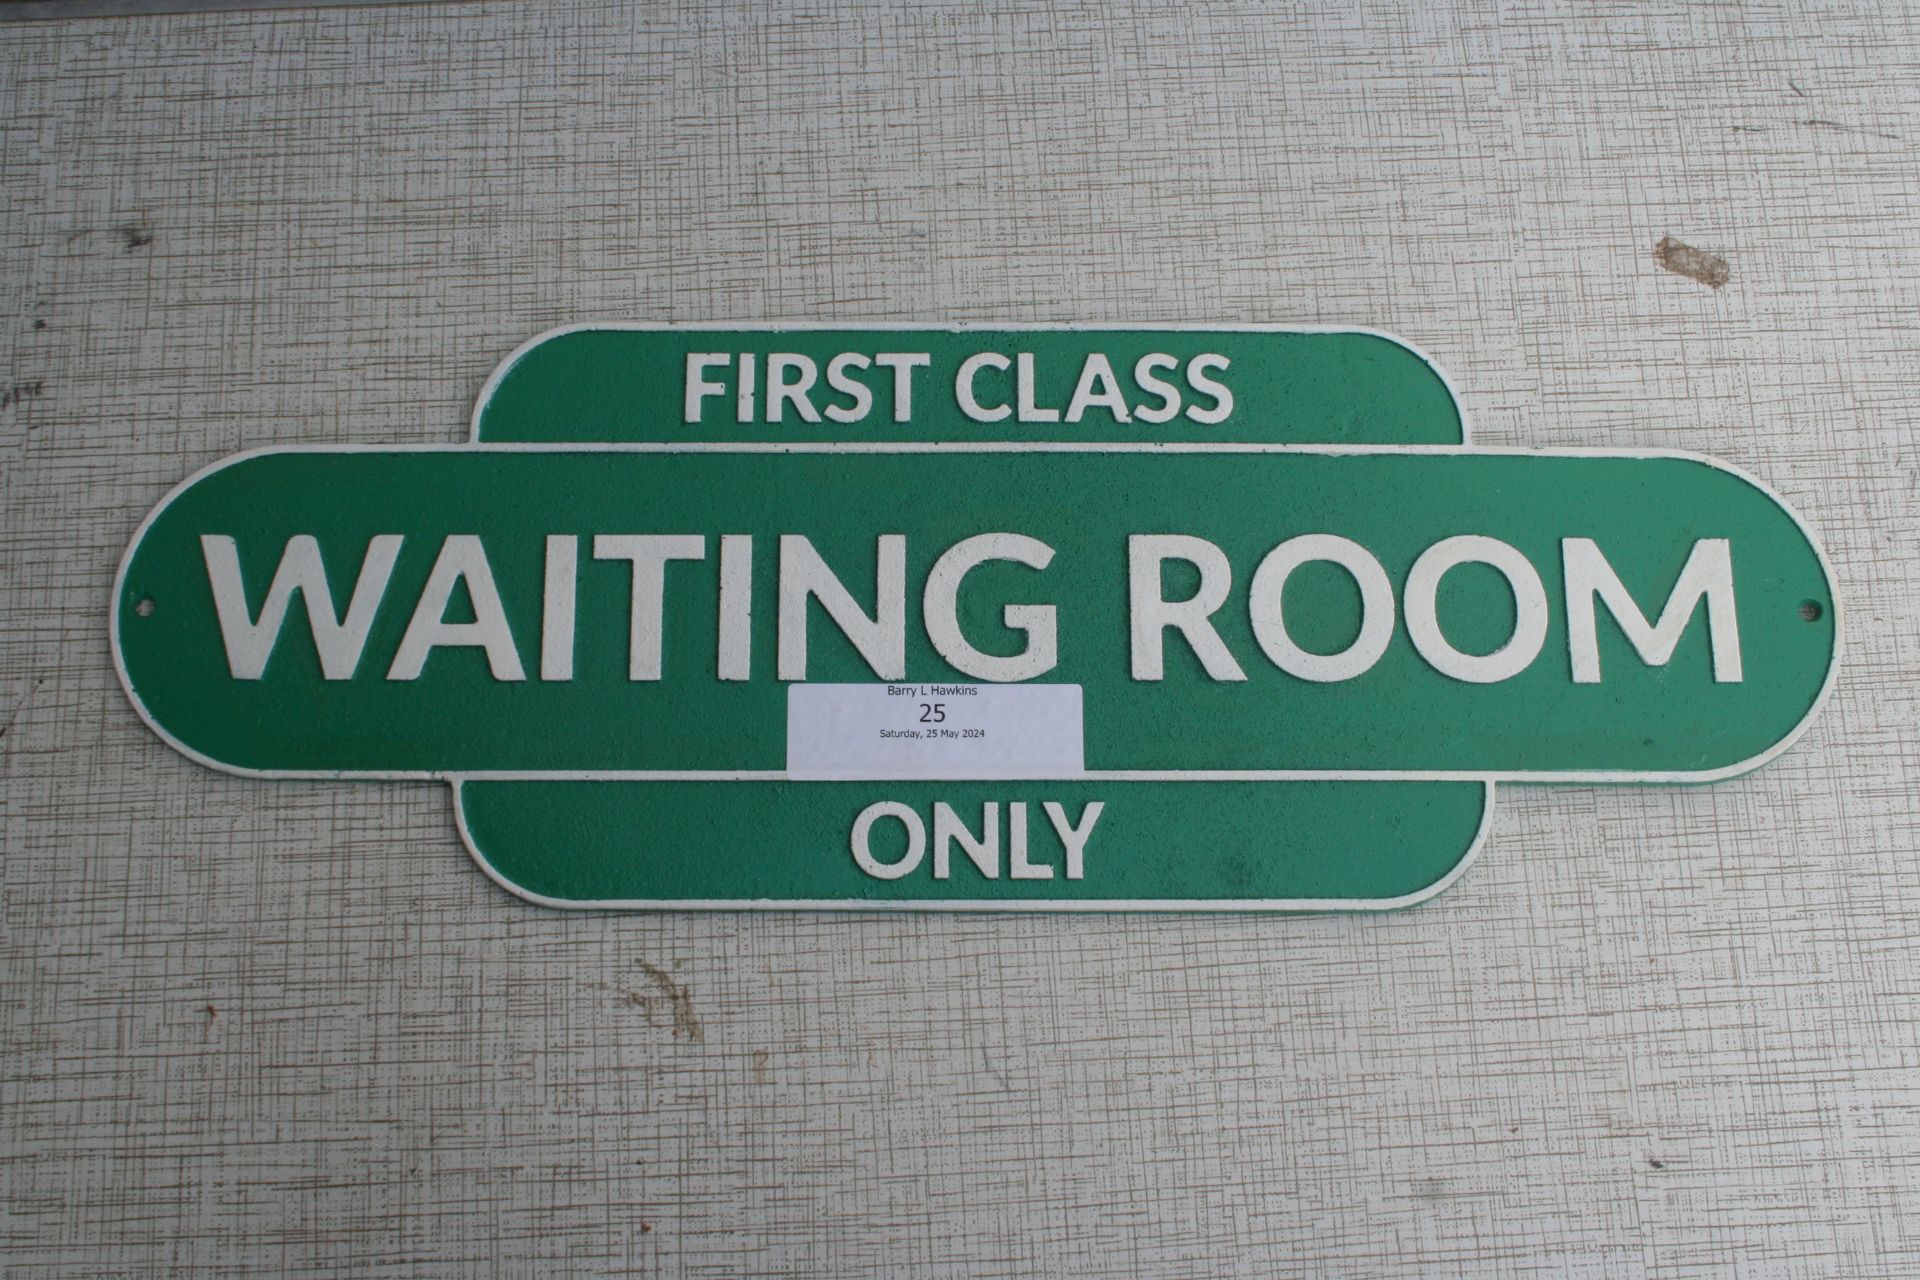 Waiting room sign